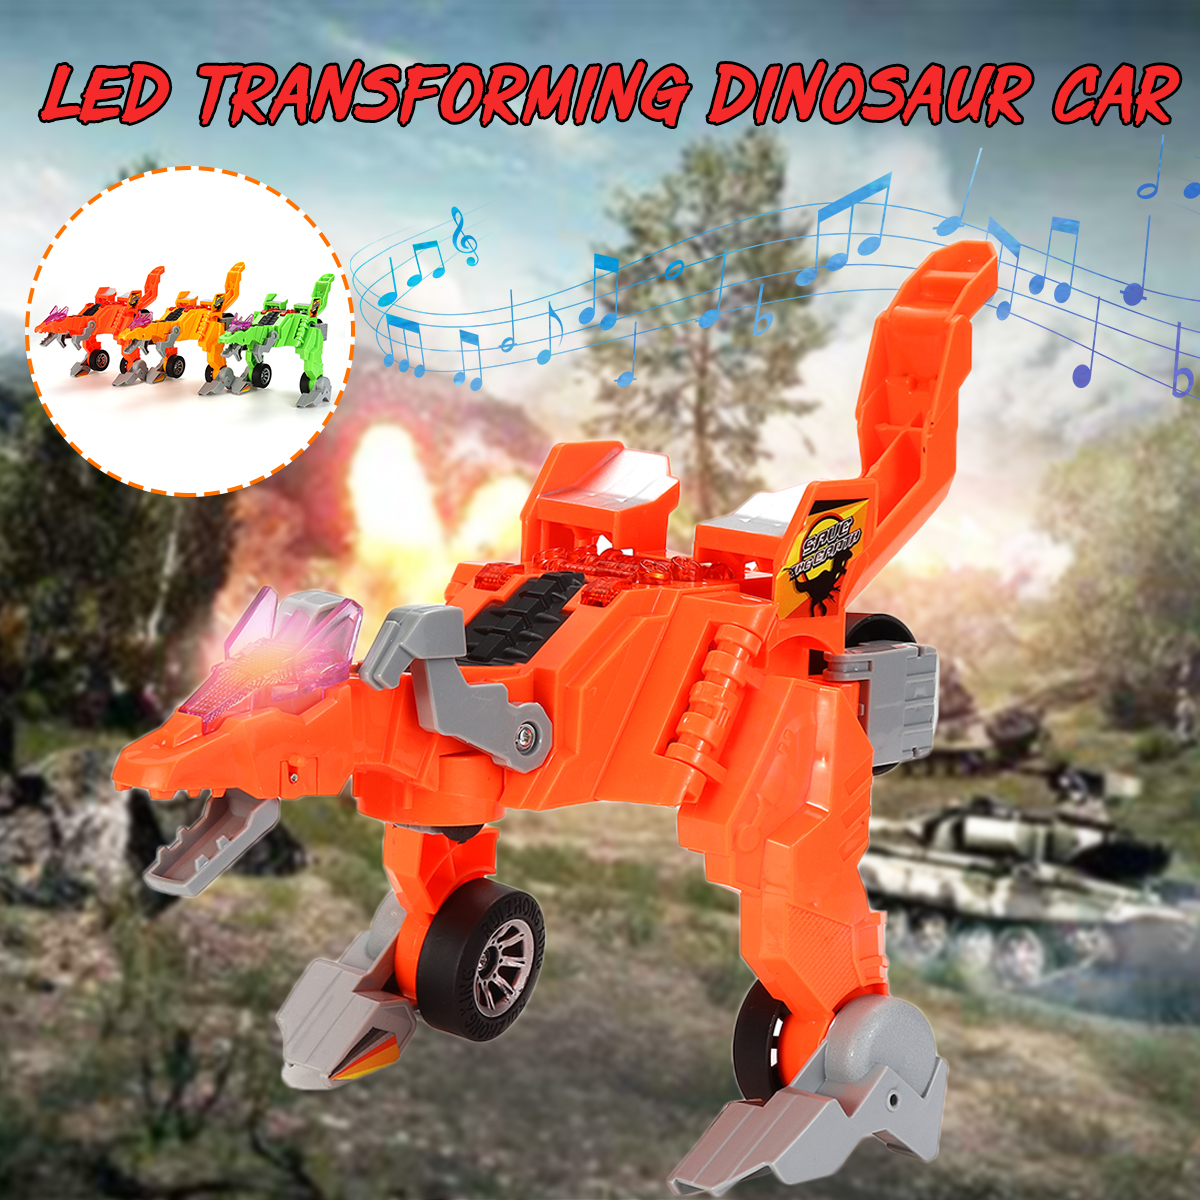 Electric-Transforming-T-Rex-Dinosaur-LED-Car-with-Light-Sound-Diecast-Model-Toy-1591202-3